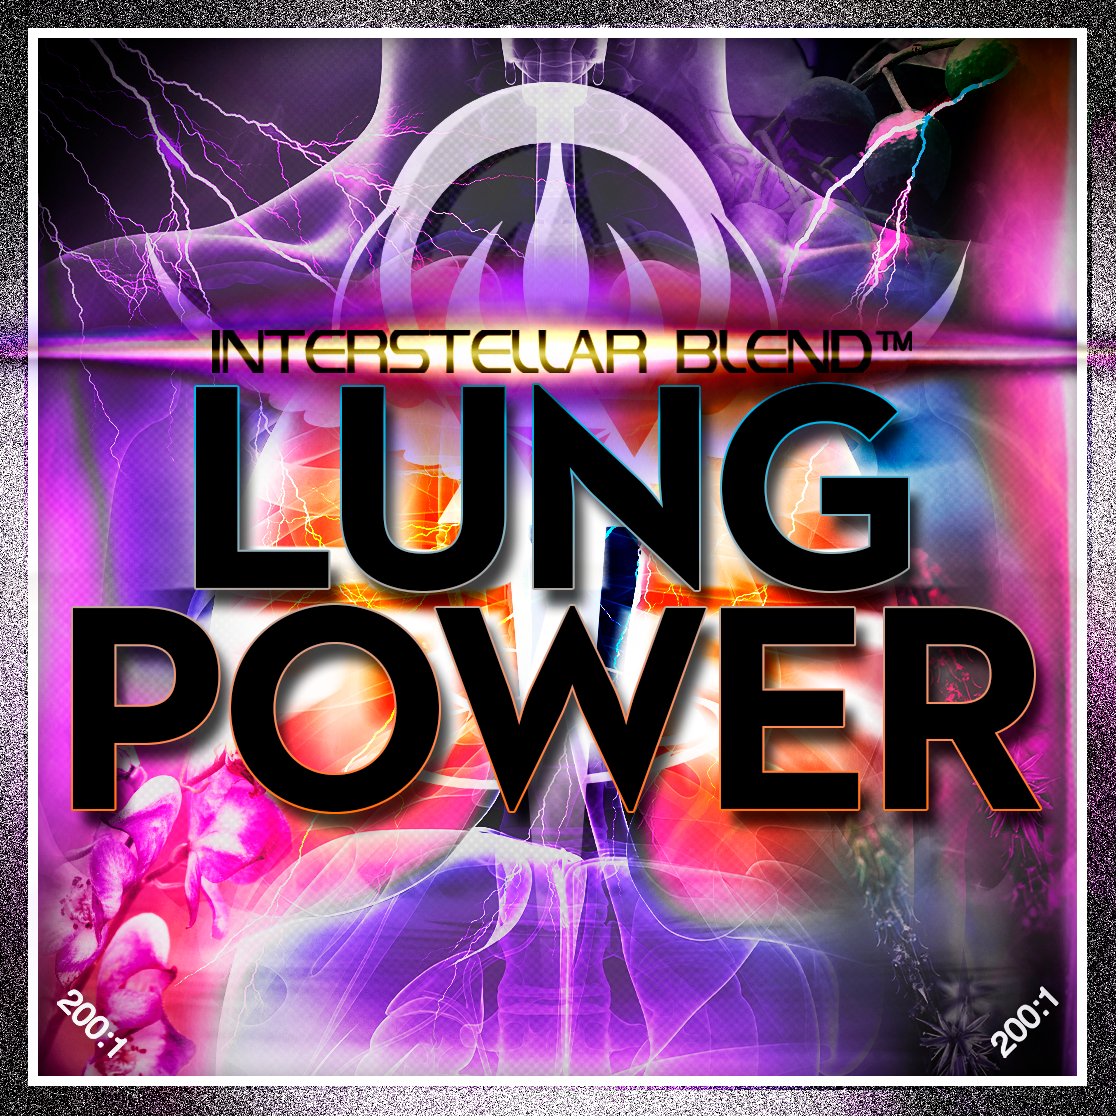 LUNG POWER 200:1 New!